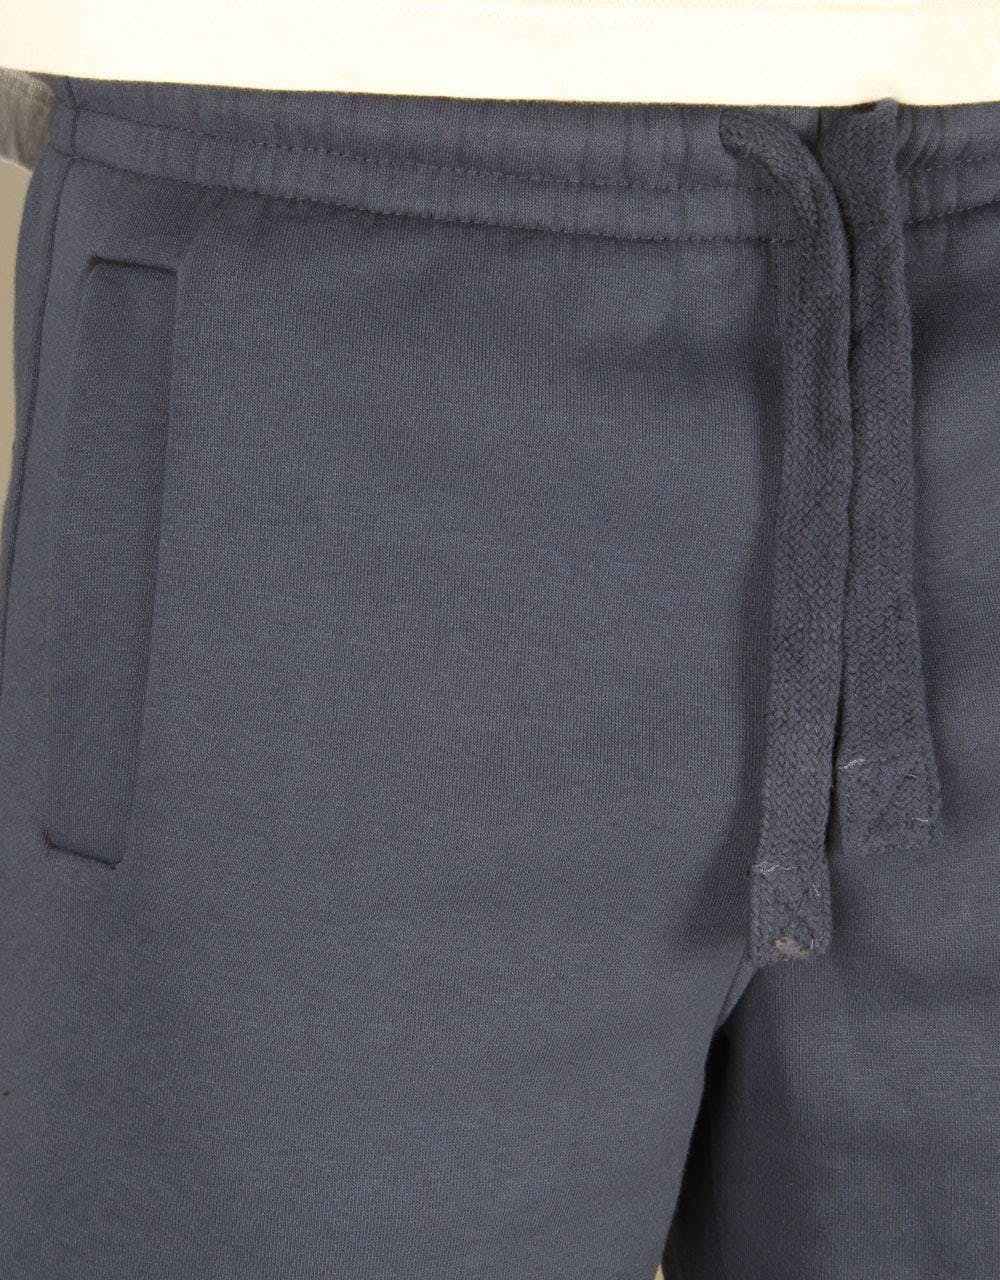 Route One Sweat Shorts - Navy